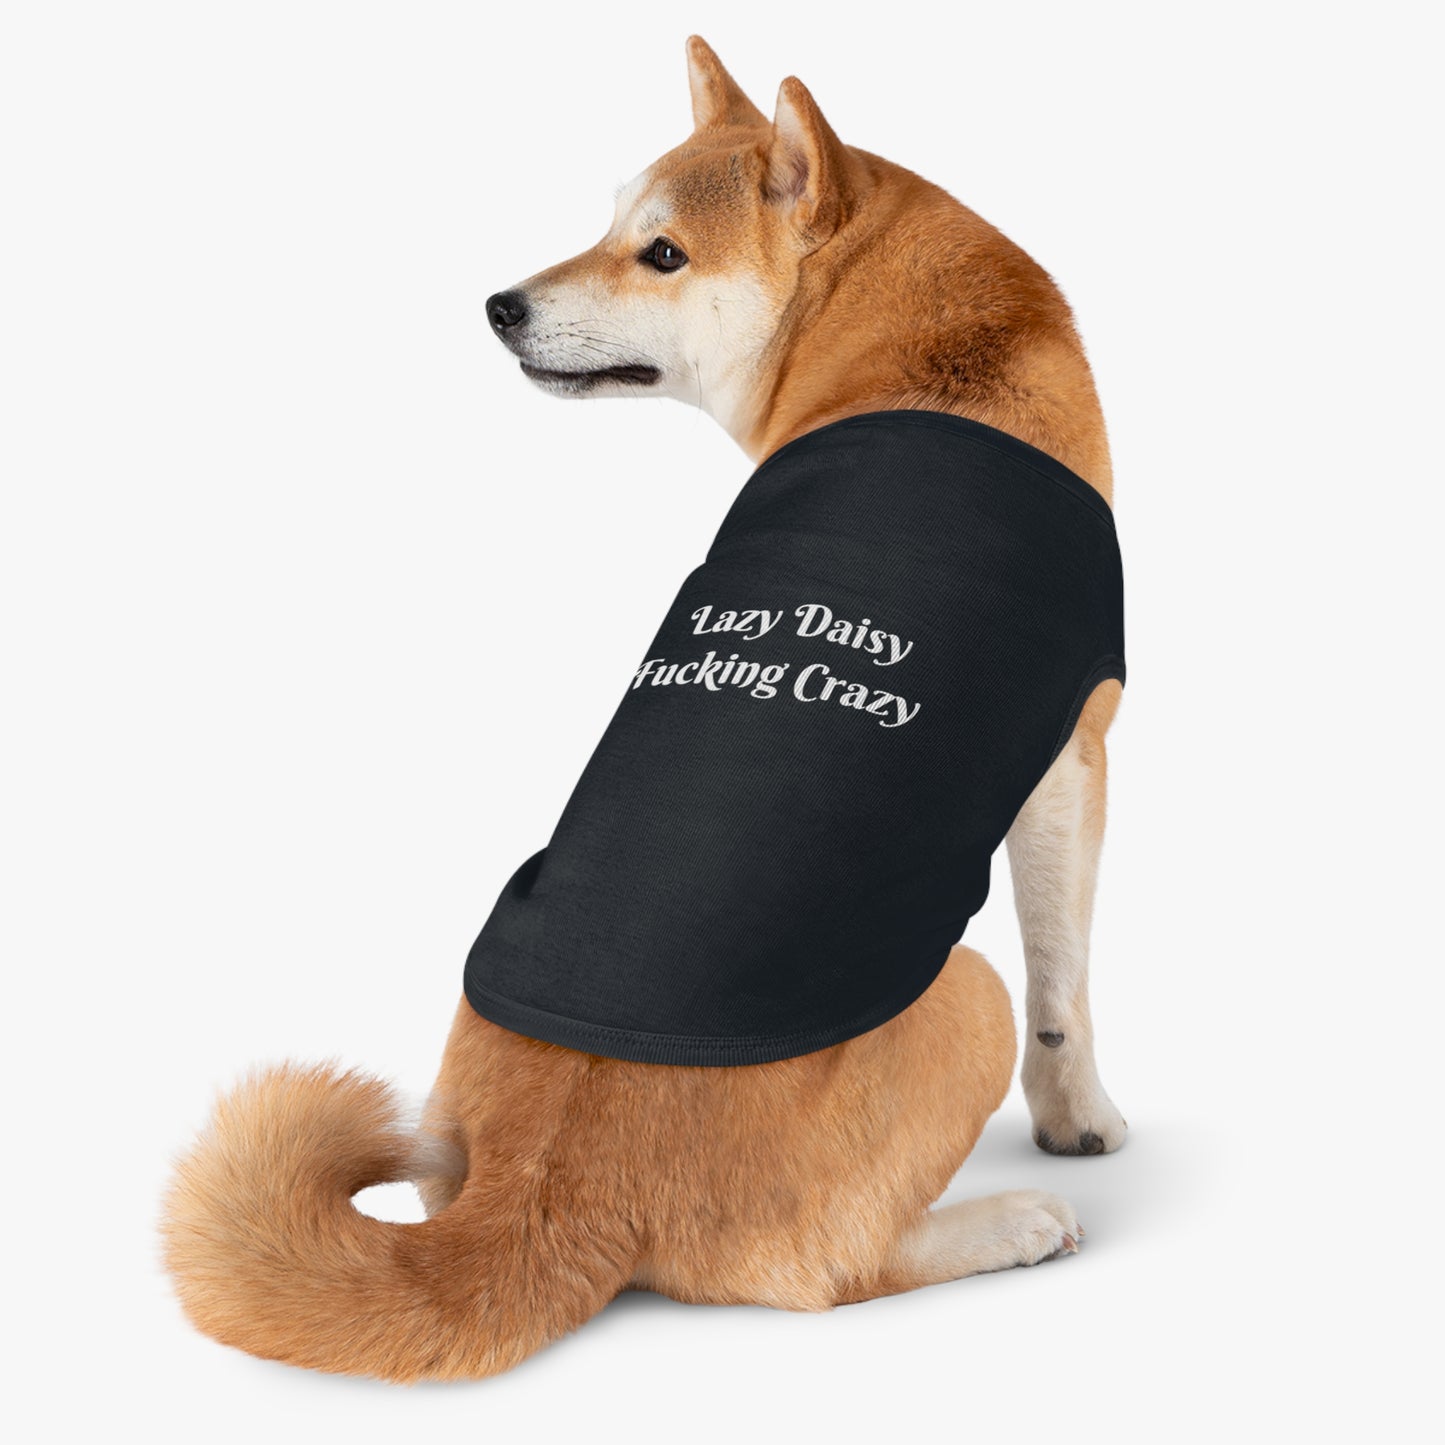 Lazy Daisy Fucking Crazy Pet Tank Top - Unleash the Wild Side of Your Pet